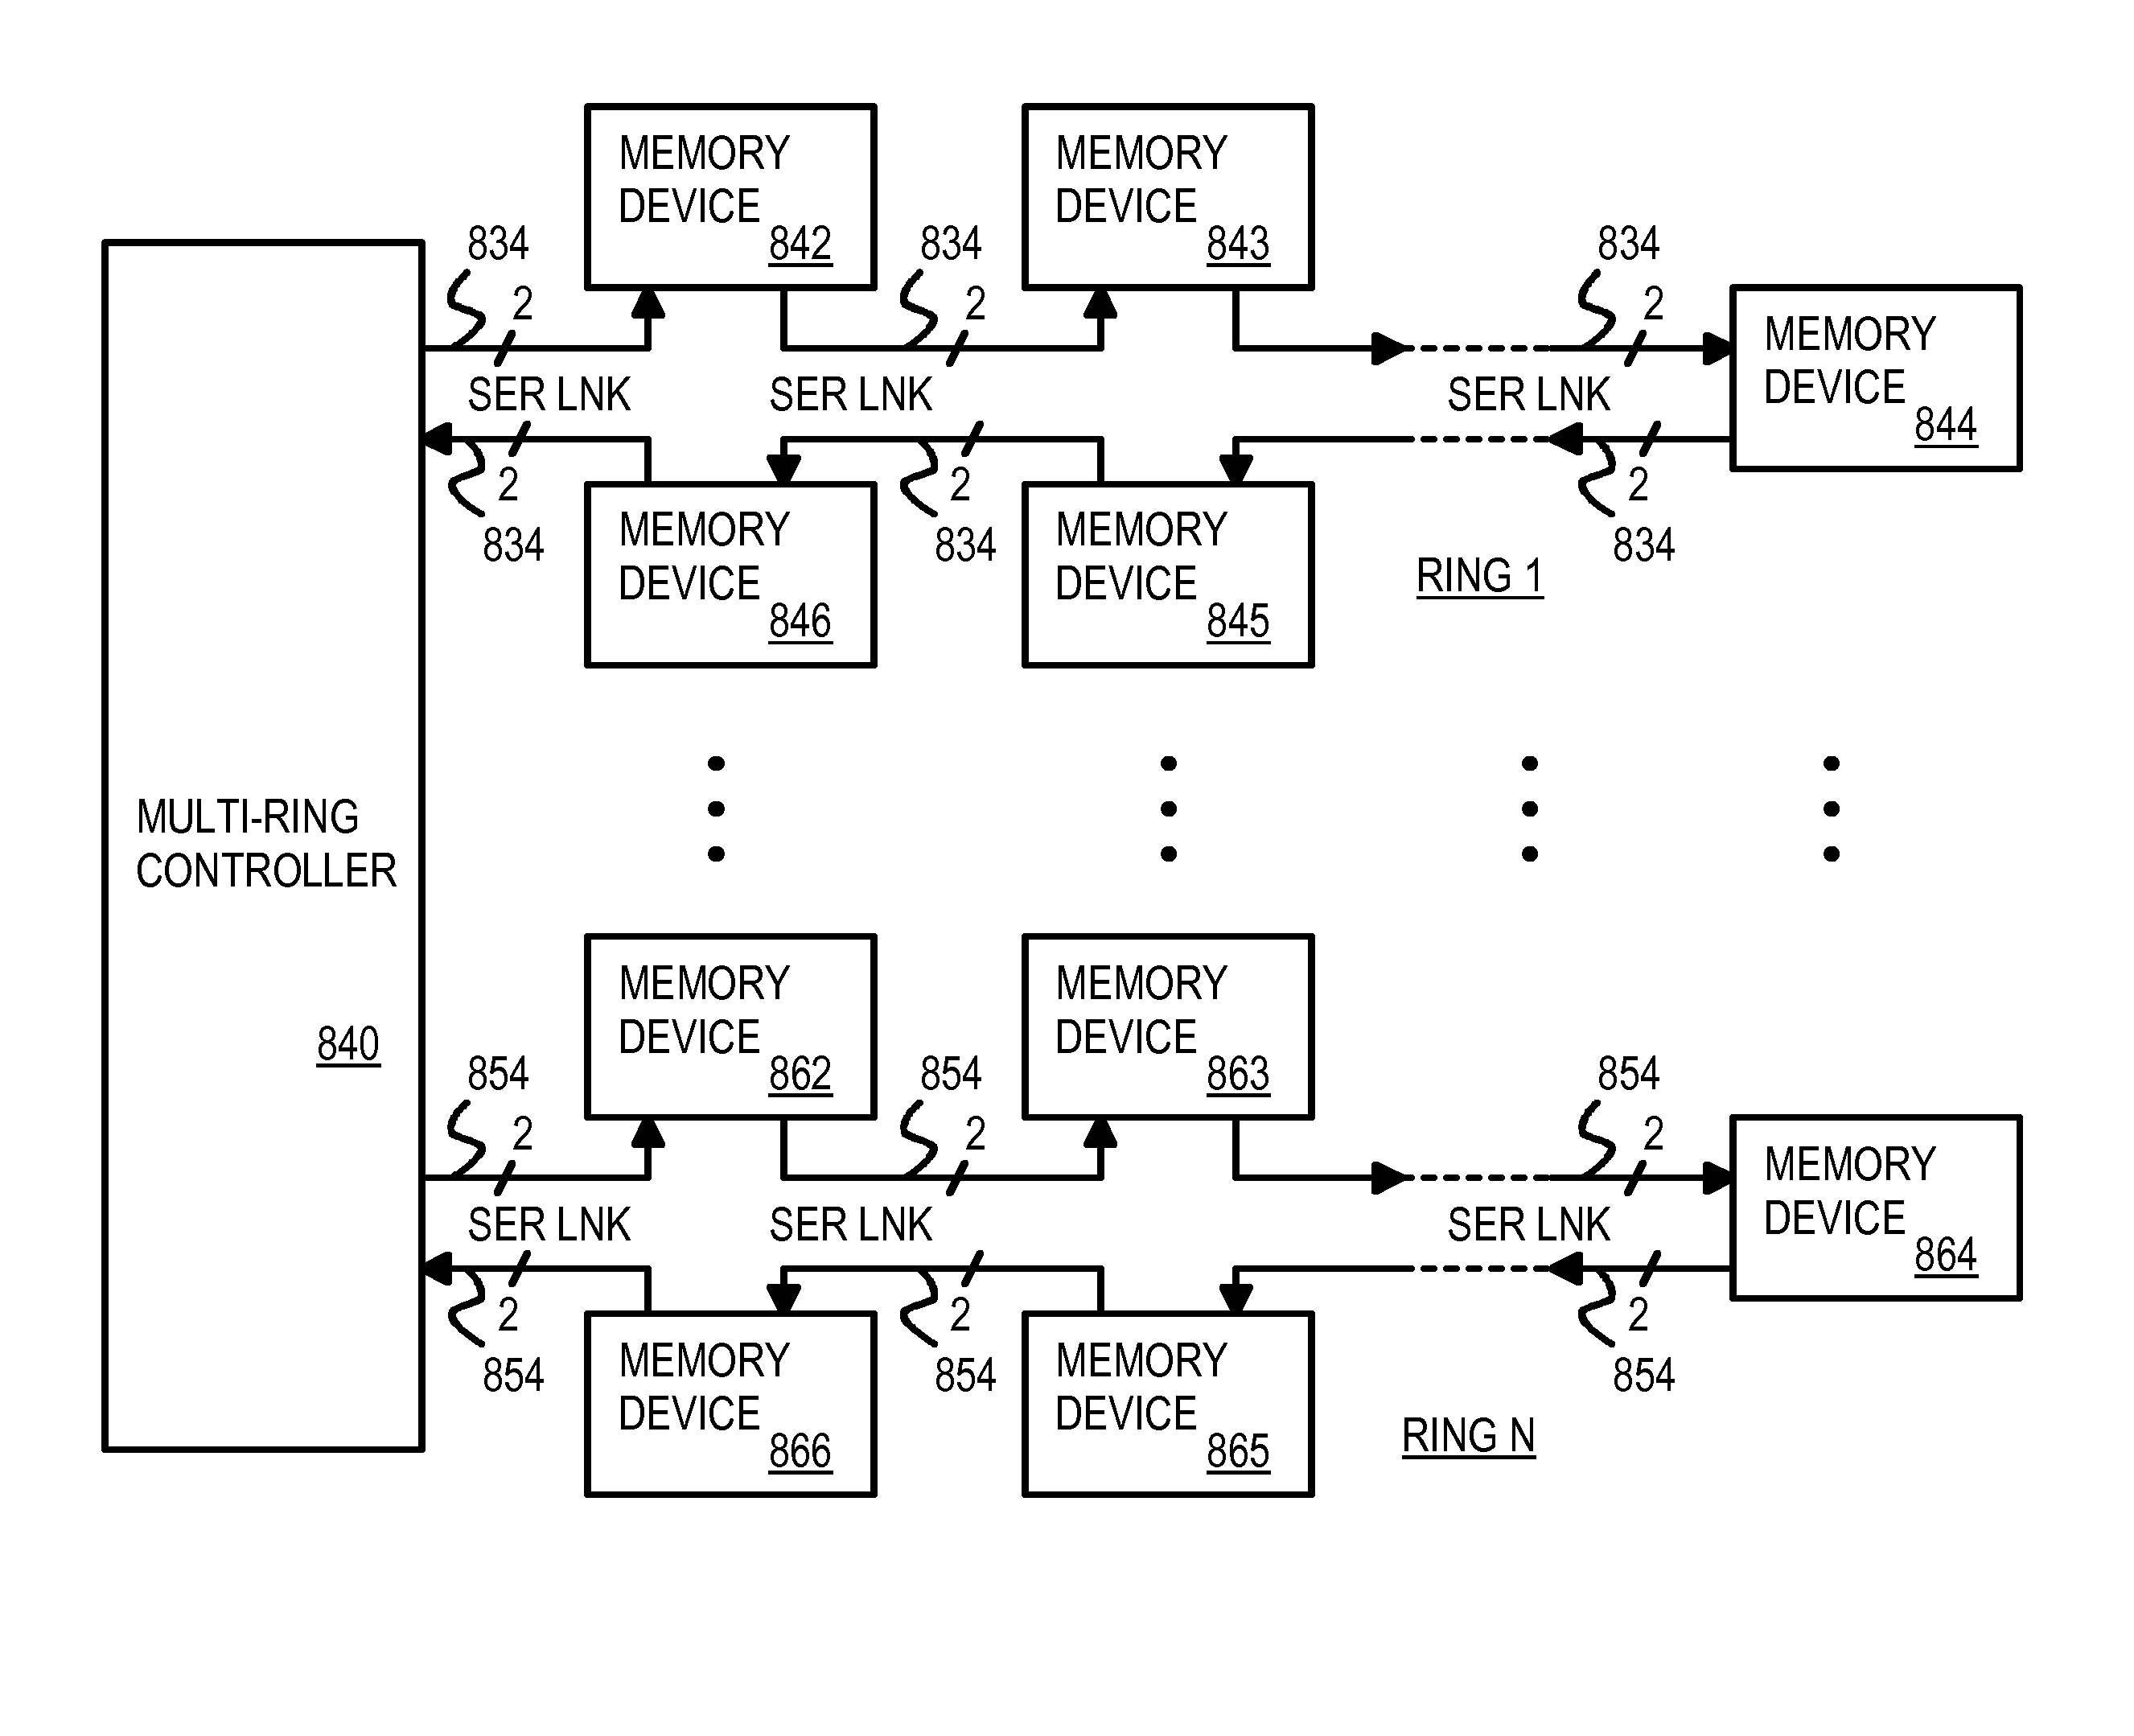 Flash / phase-change memory in multi-ring topology using serial-link packet interface